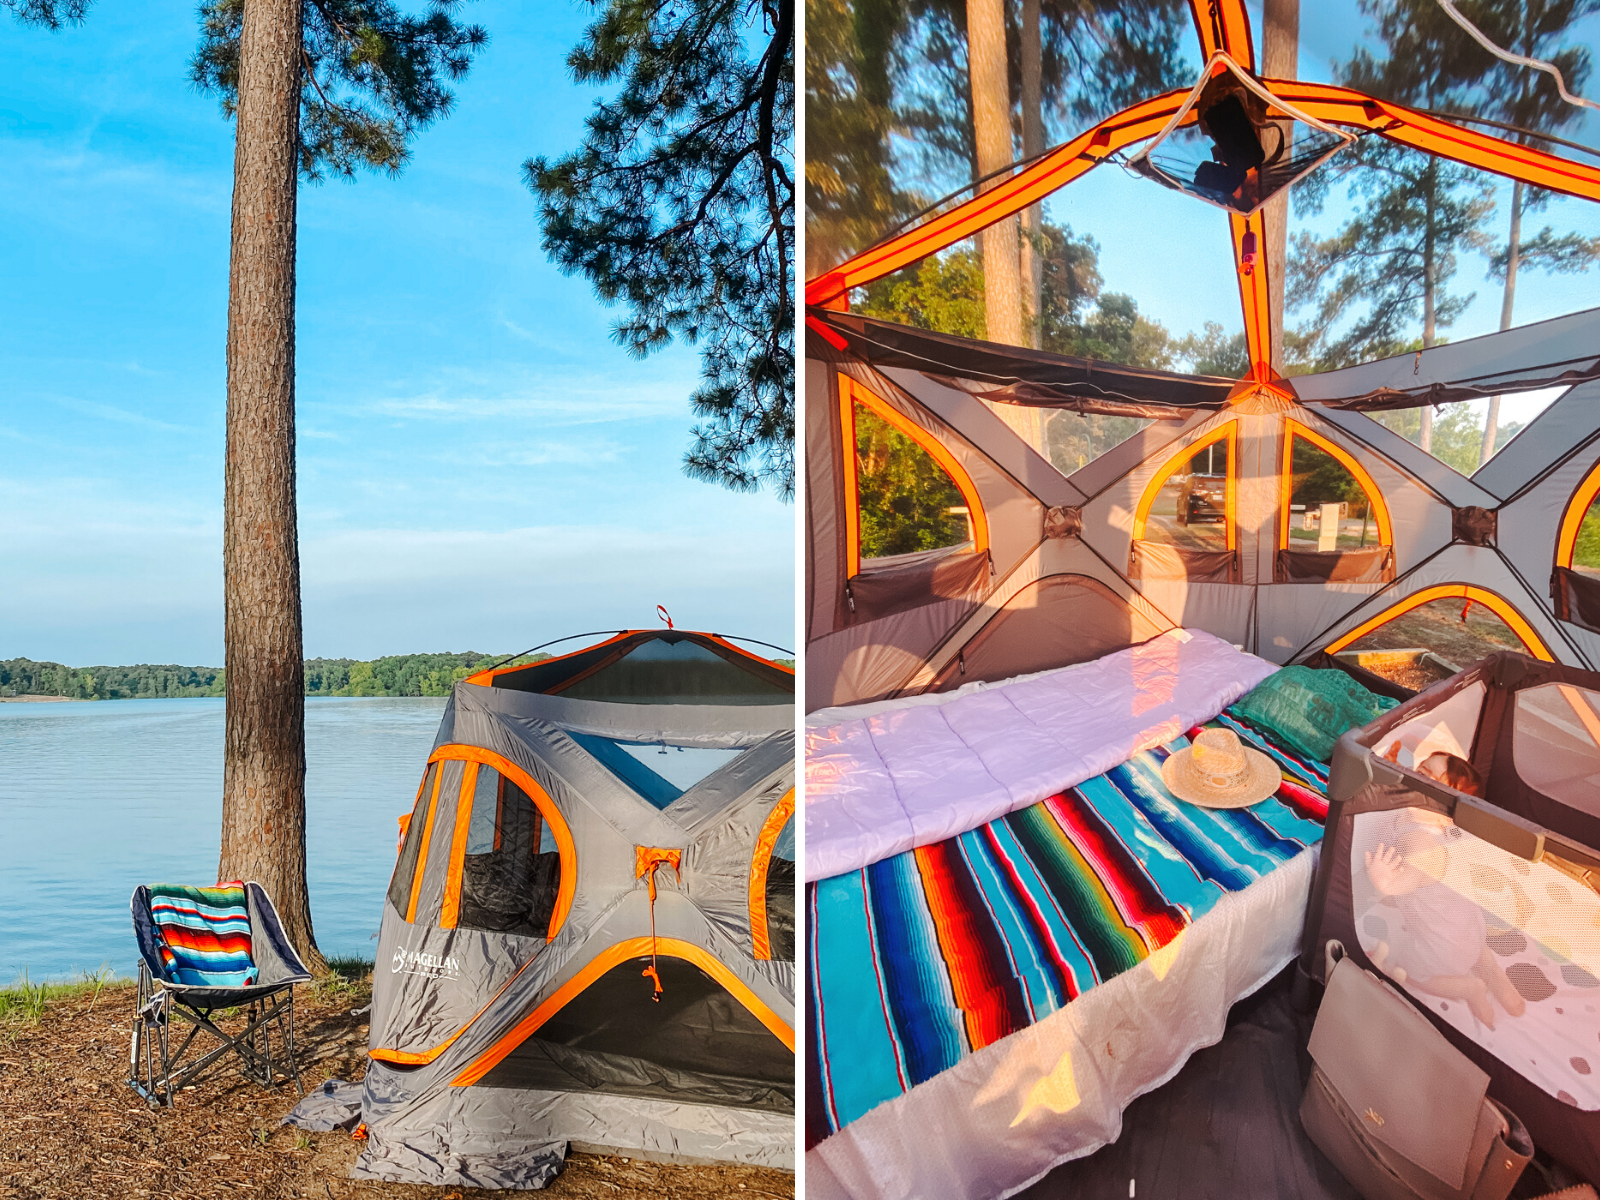 Camping With Kids by popular Memphis lifestyle blog, Lone Star Looking Glass: collage image of a Magellan tent next to a camping chair and a air mattress and portable crib set up inside a Magellan tent.  